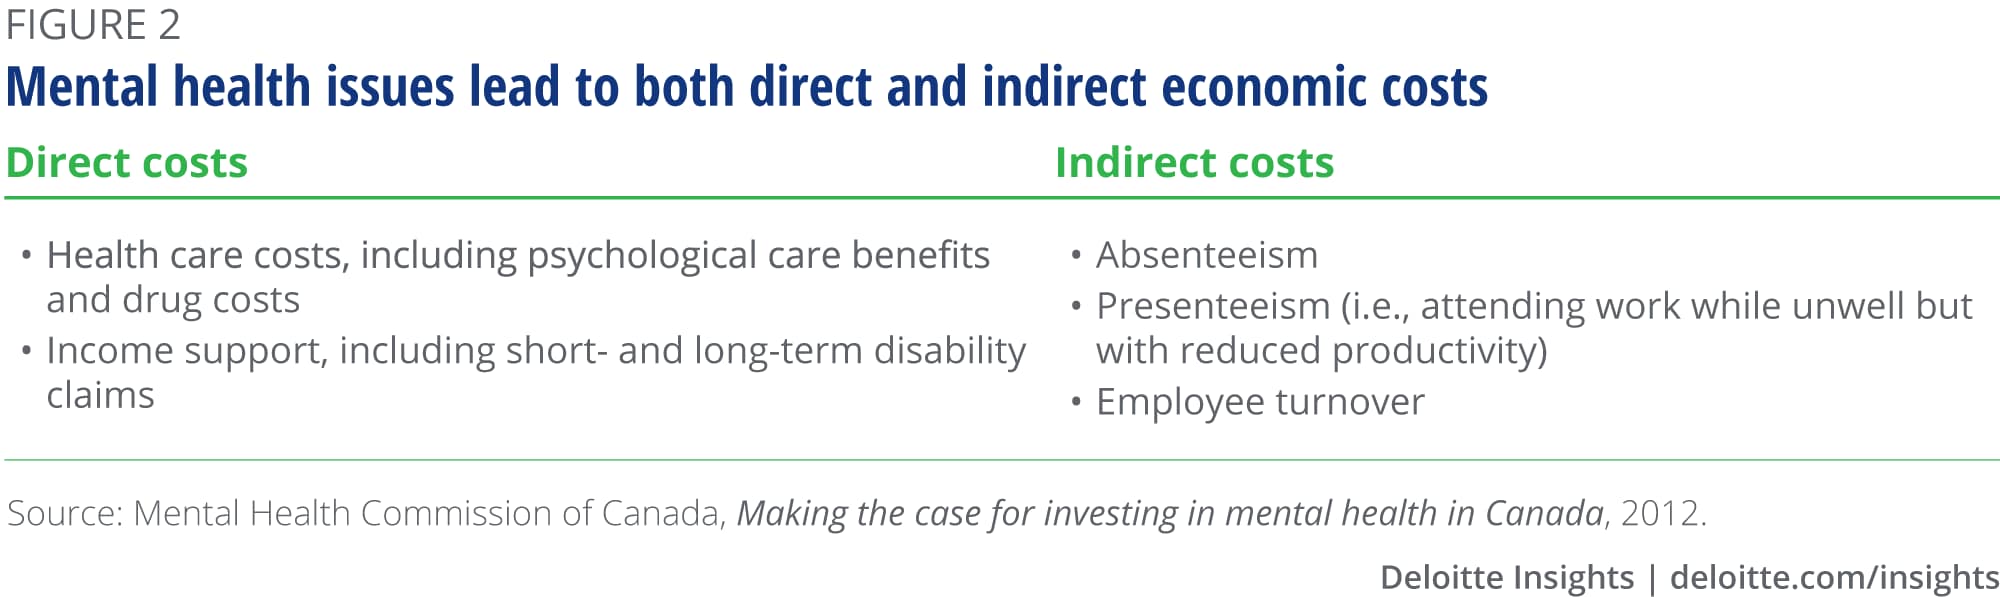 Mental health issues lead to both direct and indirect economic costs